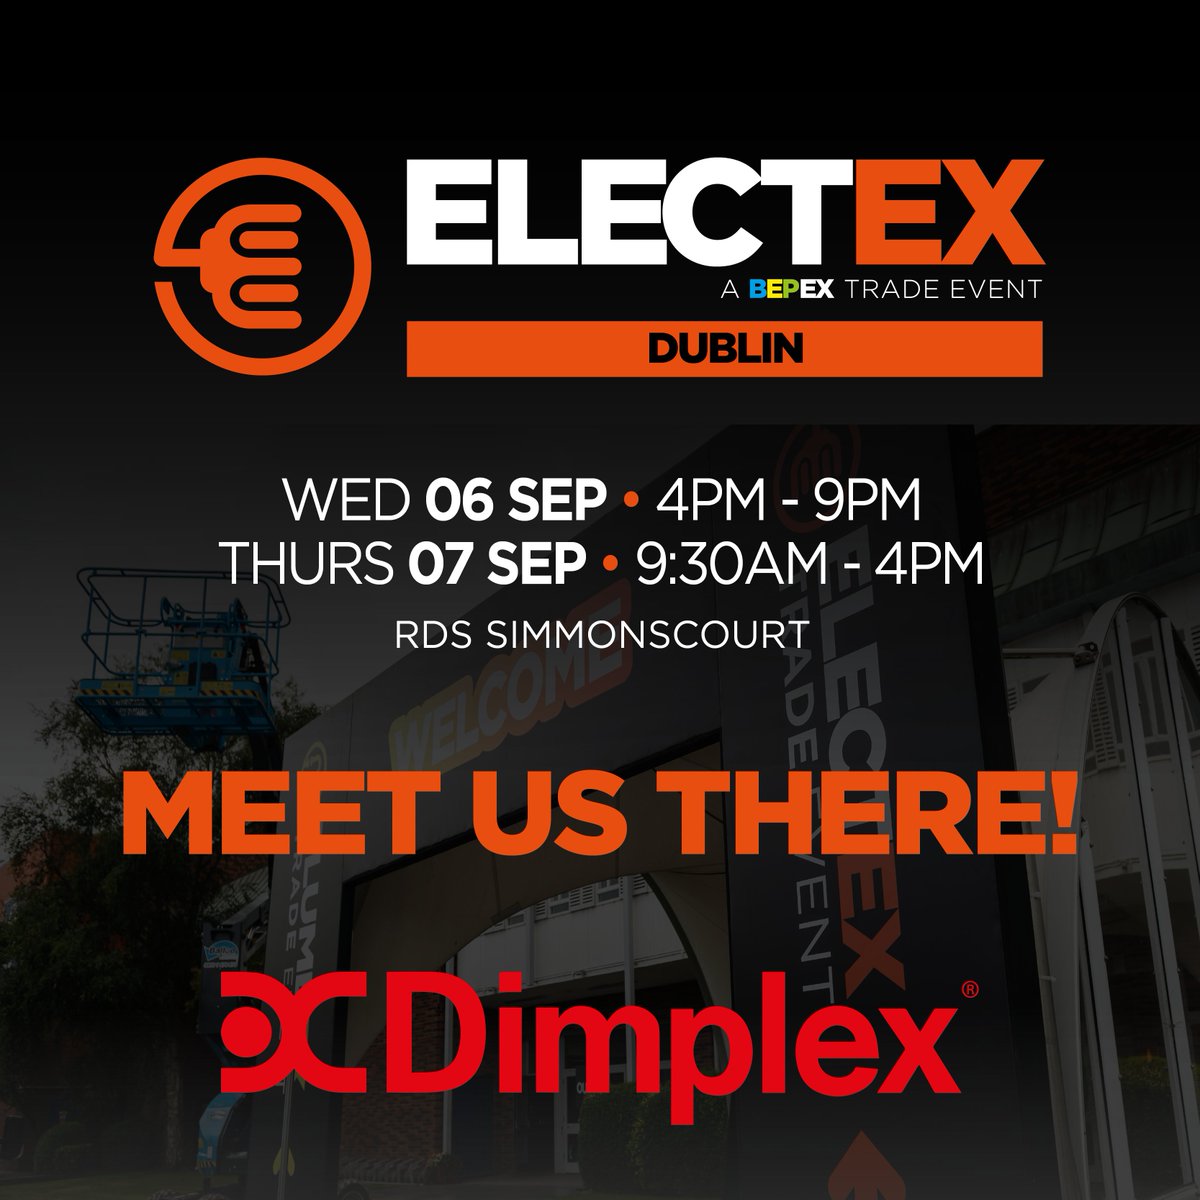 We are happy to announce we will be at this year's Electex Trade Show. Visit us at stand E1! @Elecmagazine #ELECTEX2023 #Electex #tradeshow